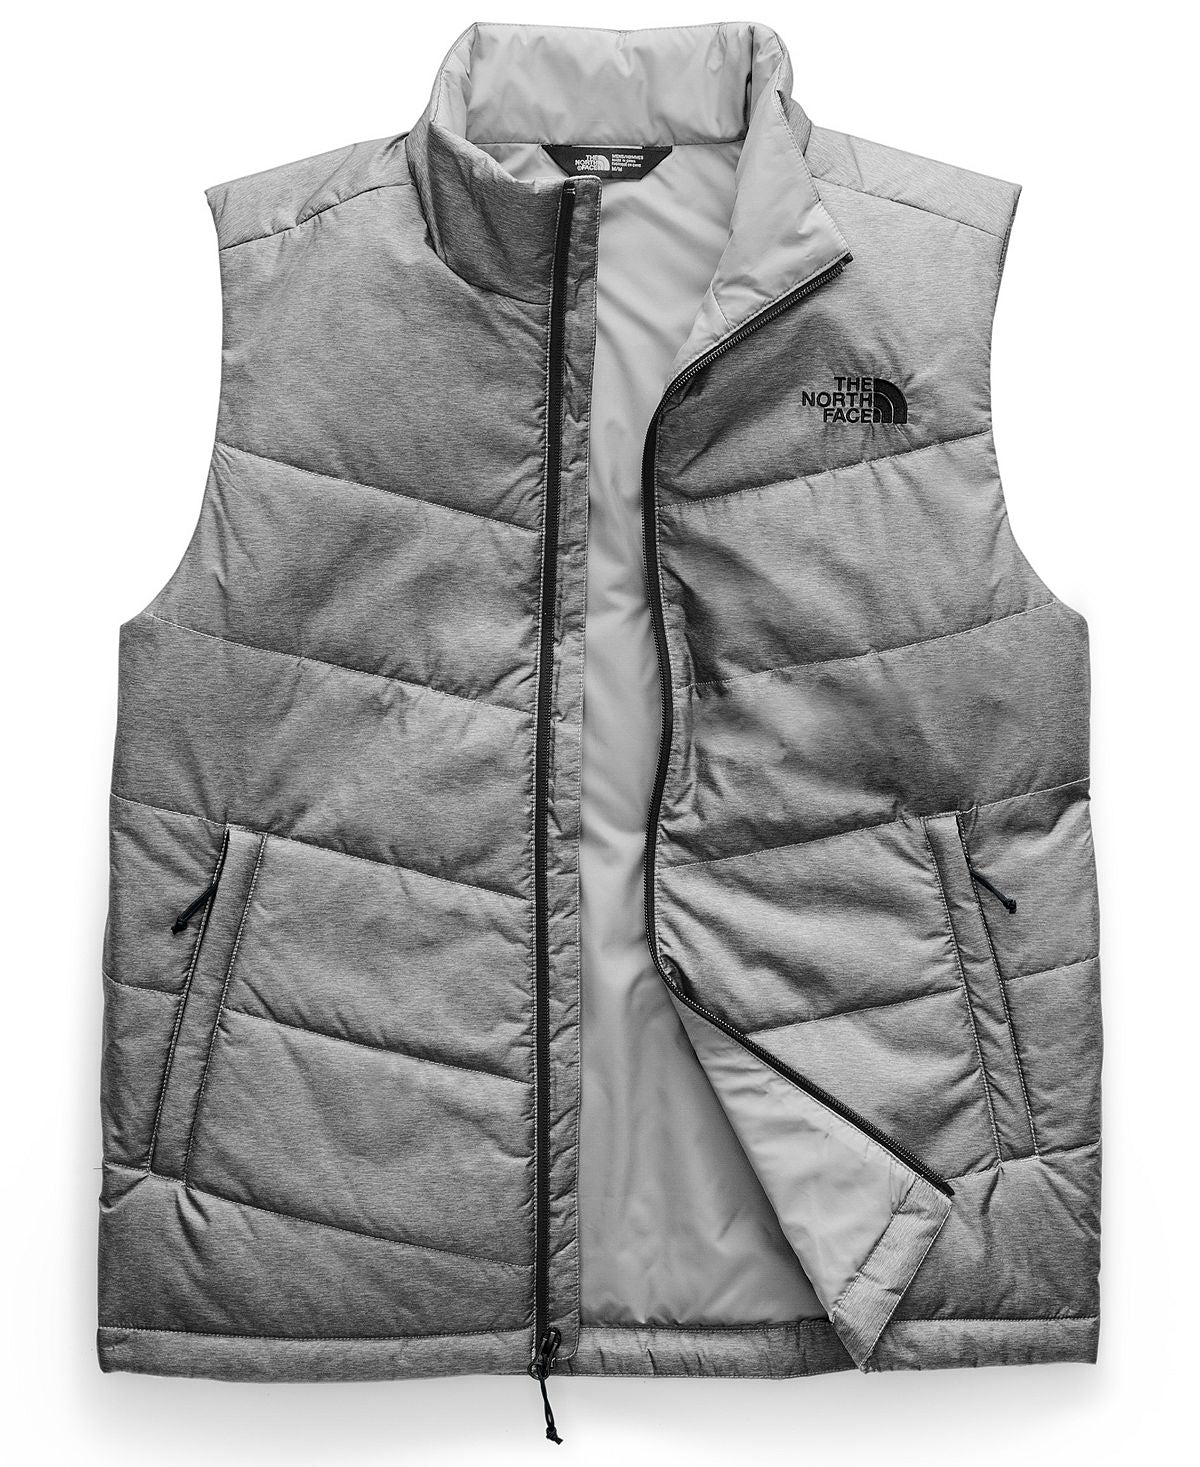 The North Face Junction Insulated Vest Tnf Medium Grey Heather